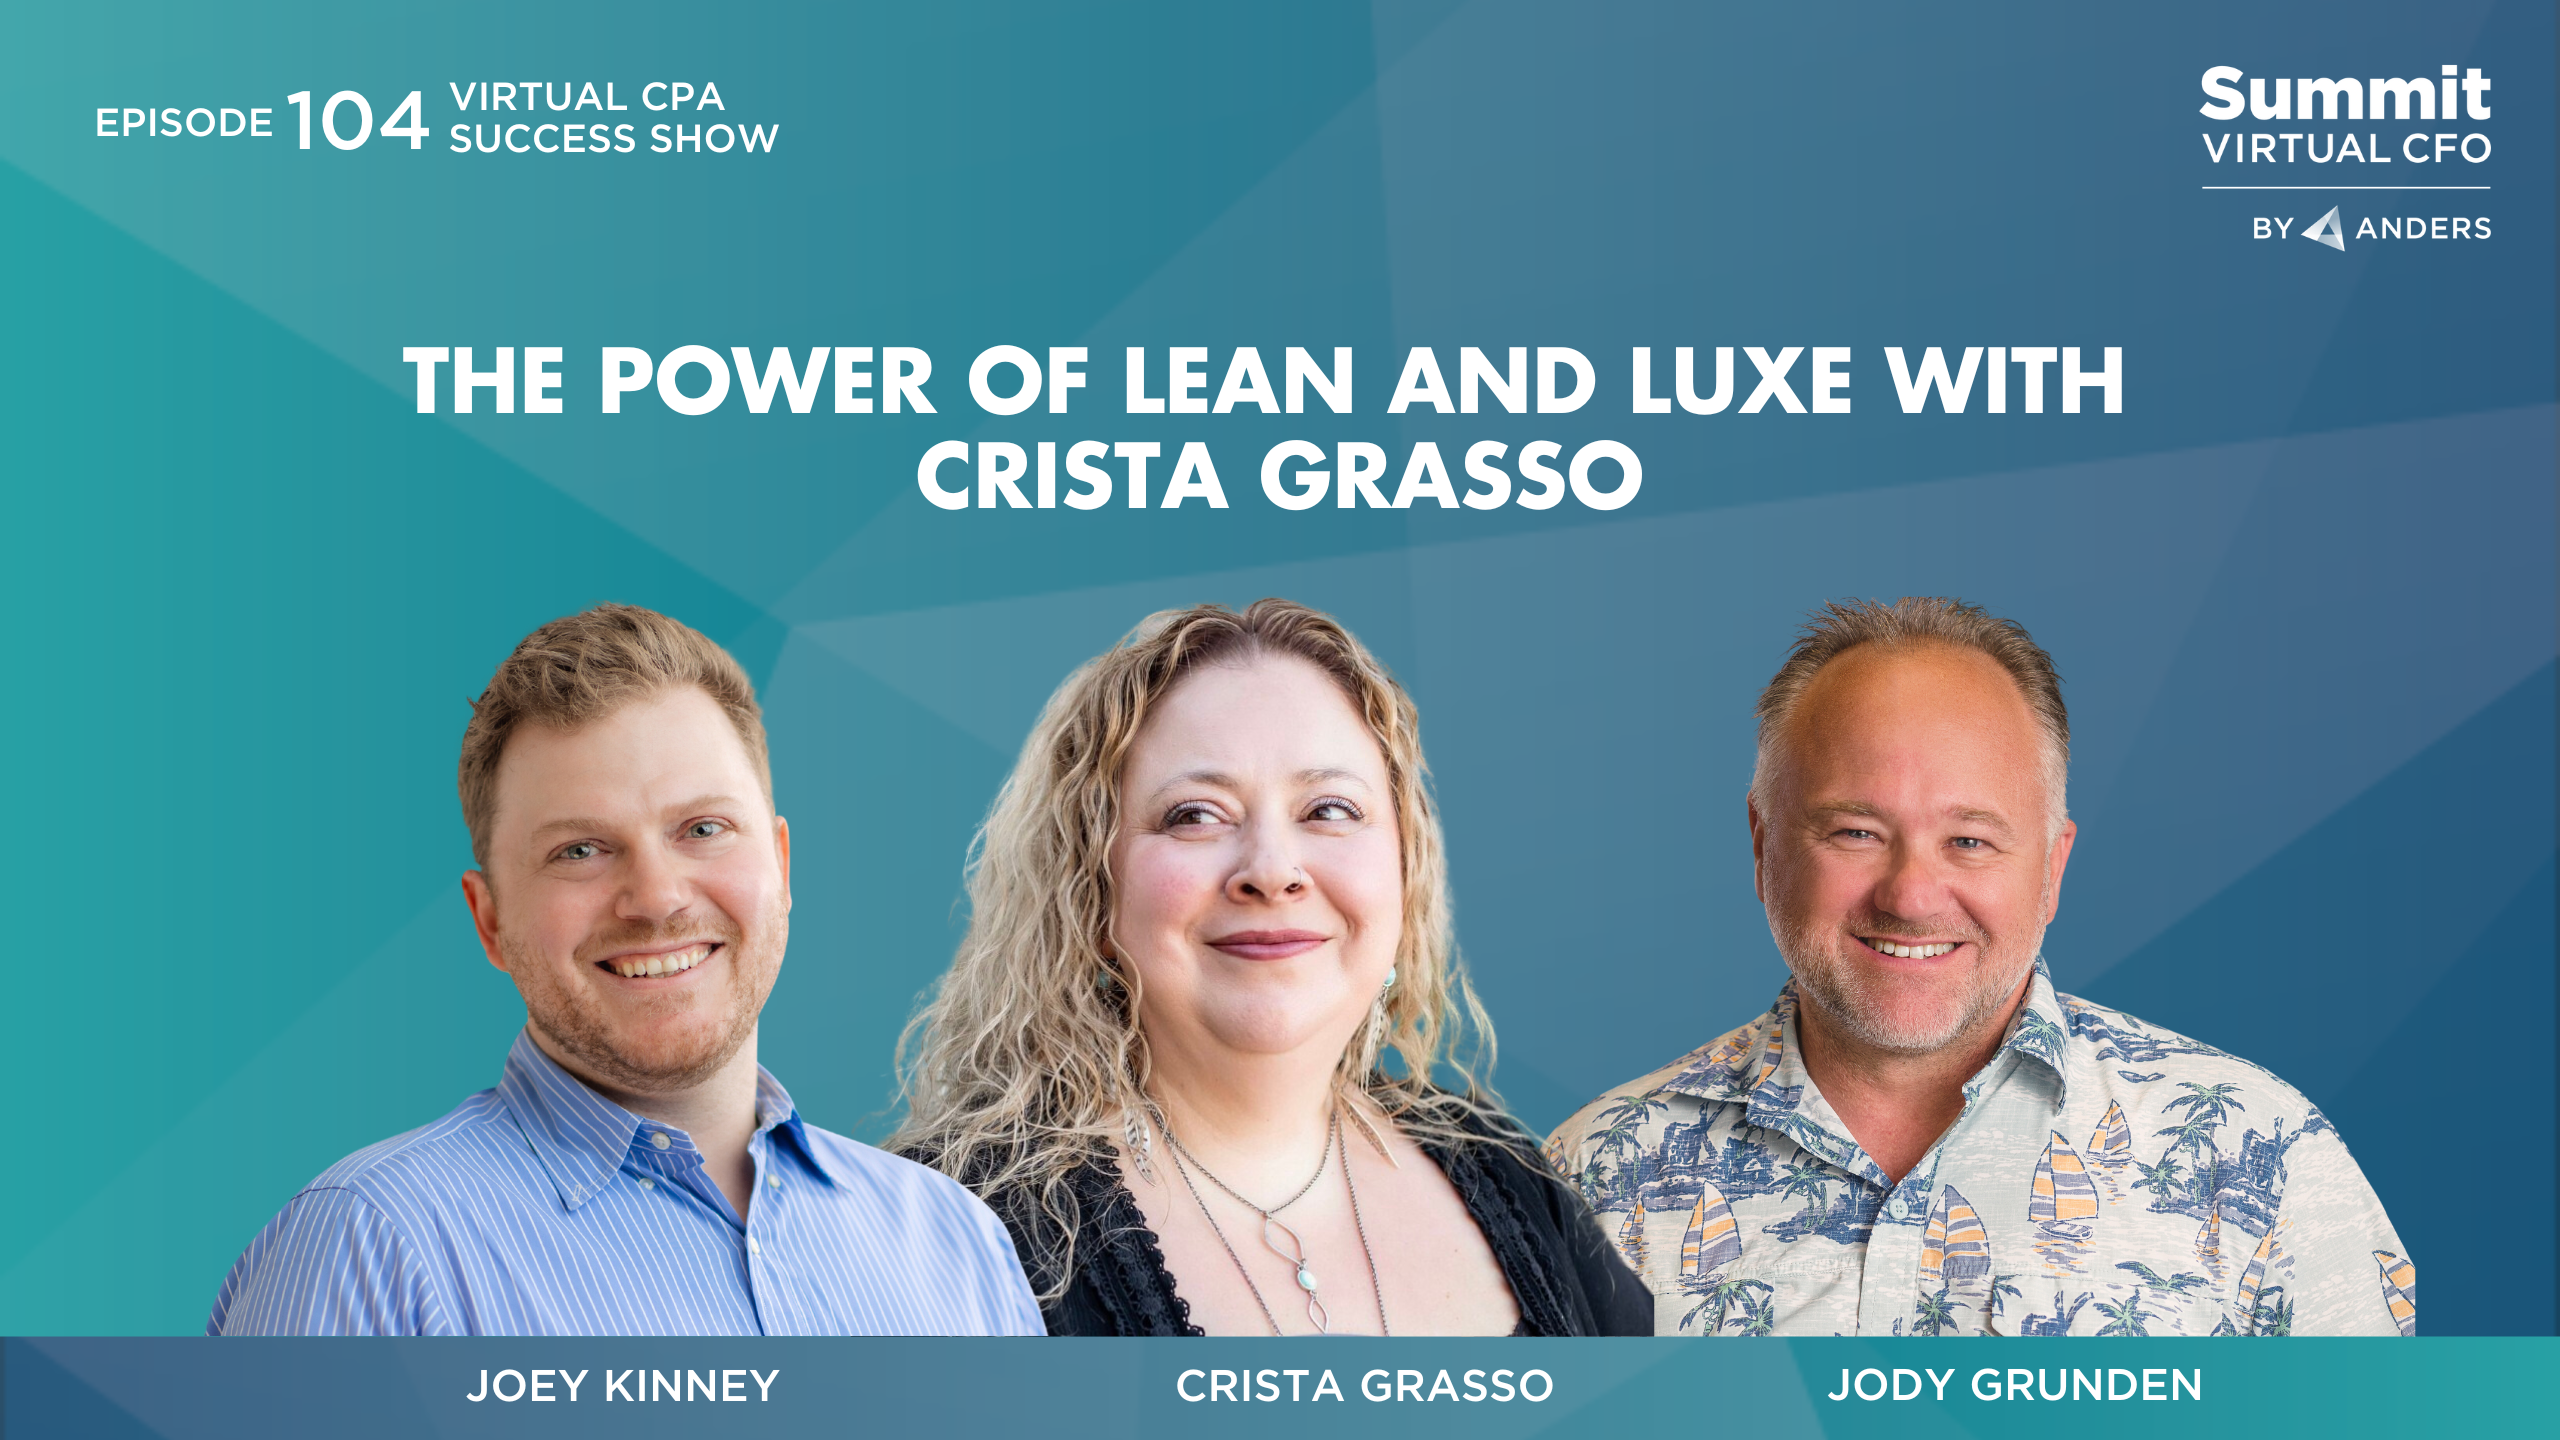 The Power of Lean and Luxe with Crista Grasso